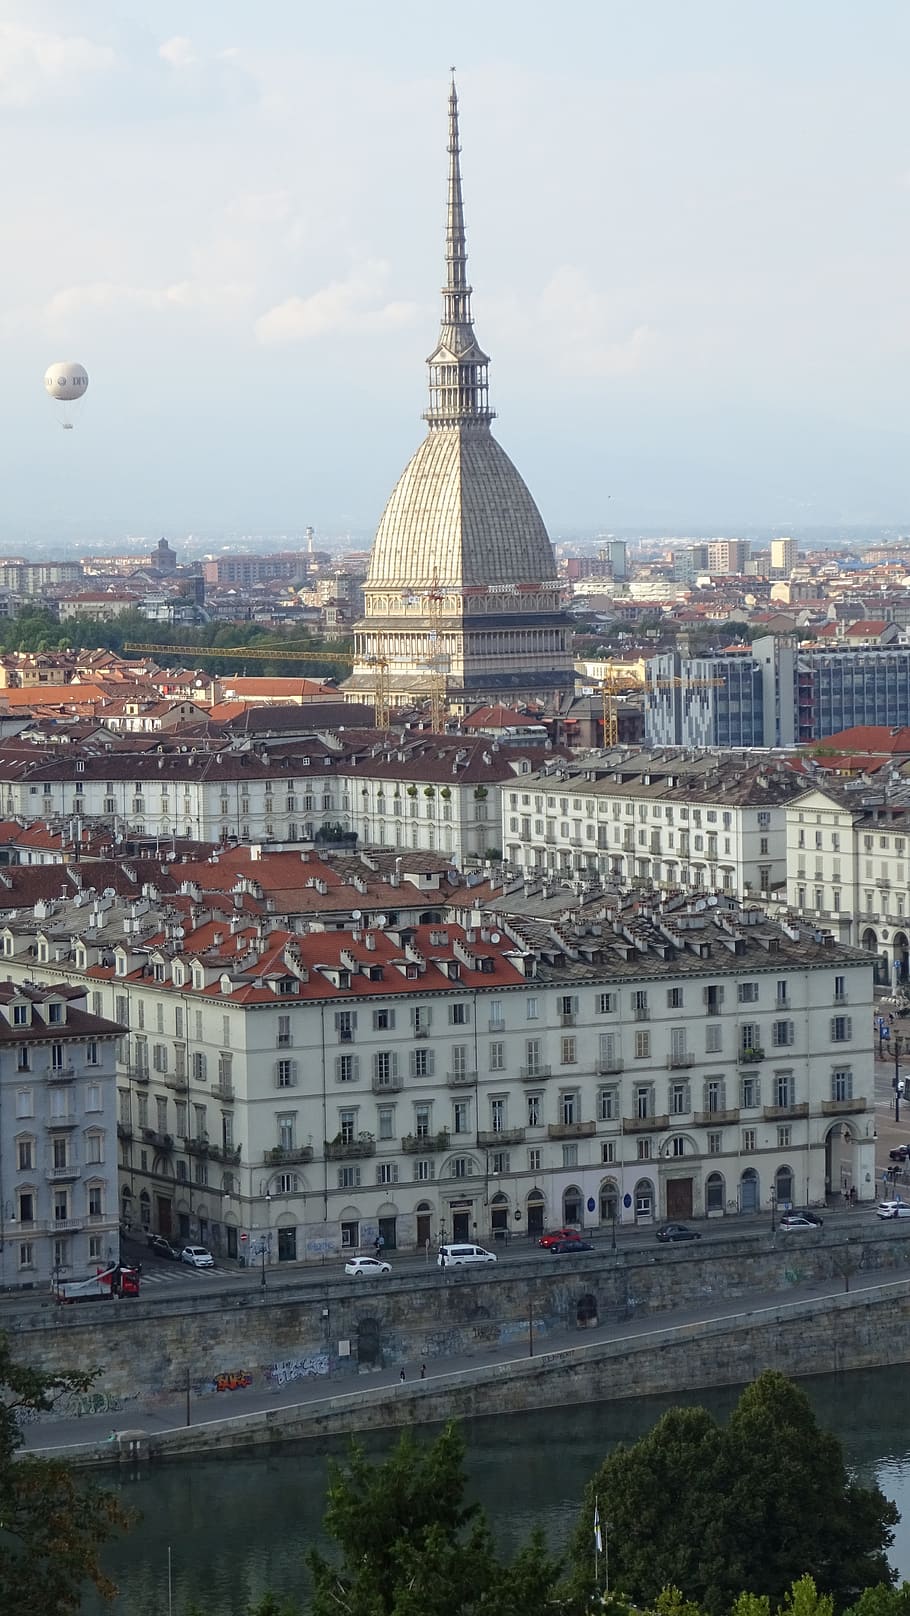 turin, piedmont, italy, architecture, europe, tourism, holidays, attractions, historical, city